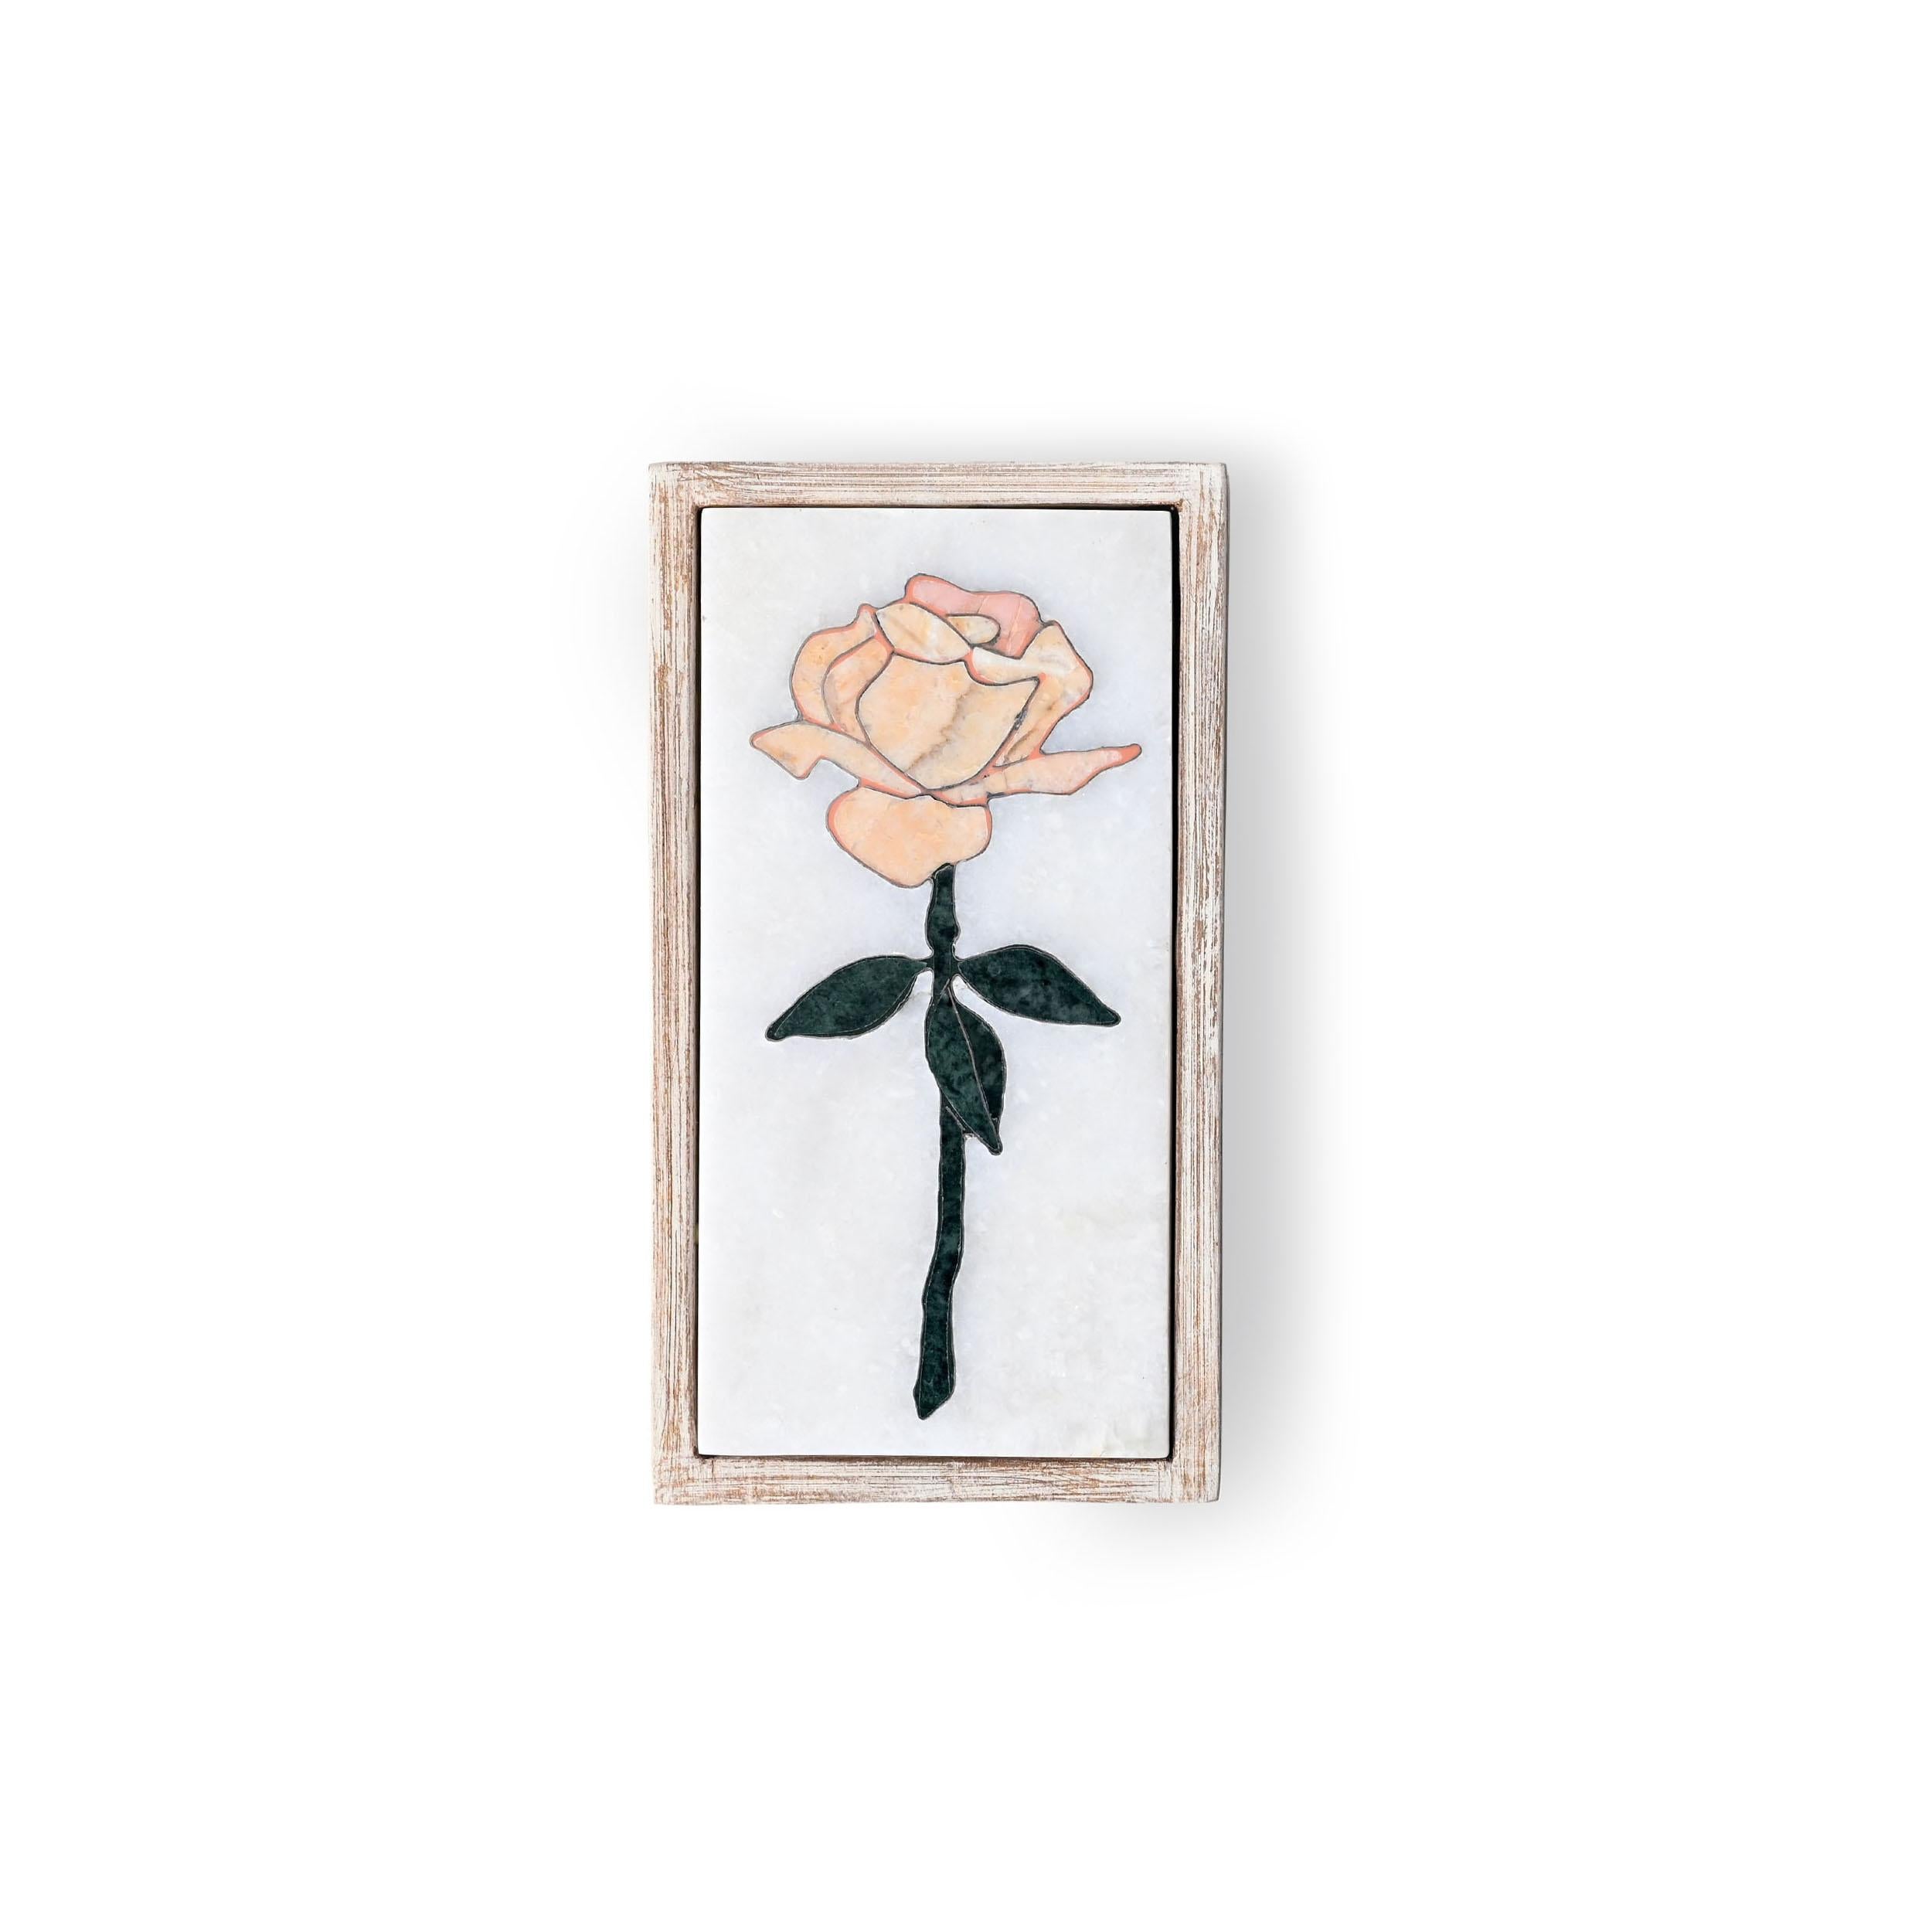 Memory of a rose box II by Studio Lel.
Dimensions: D19 x W8.9 x H5 cm.
Materials: marble, wood

These are handmade from semiprecious stone and marble in a small artisanal workshop. Please note that variations and slight imperfections are part of